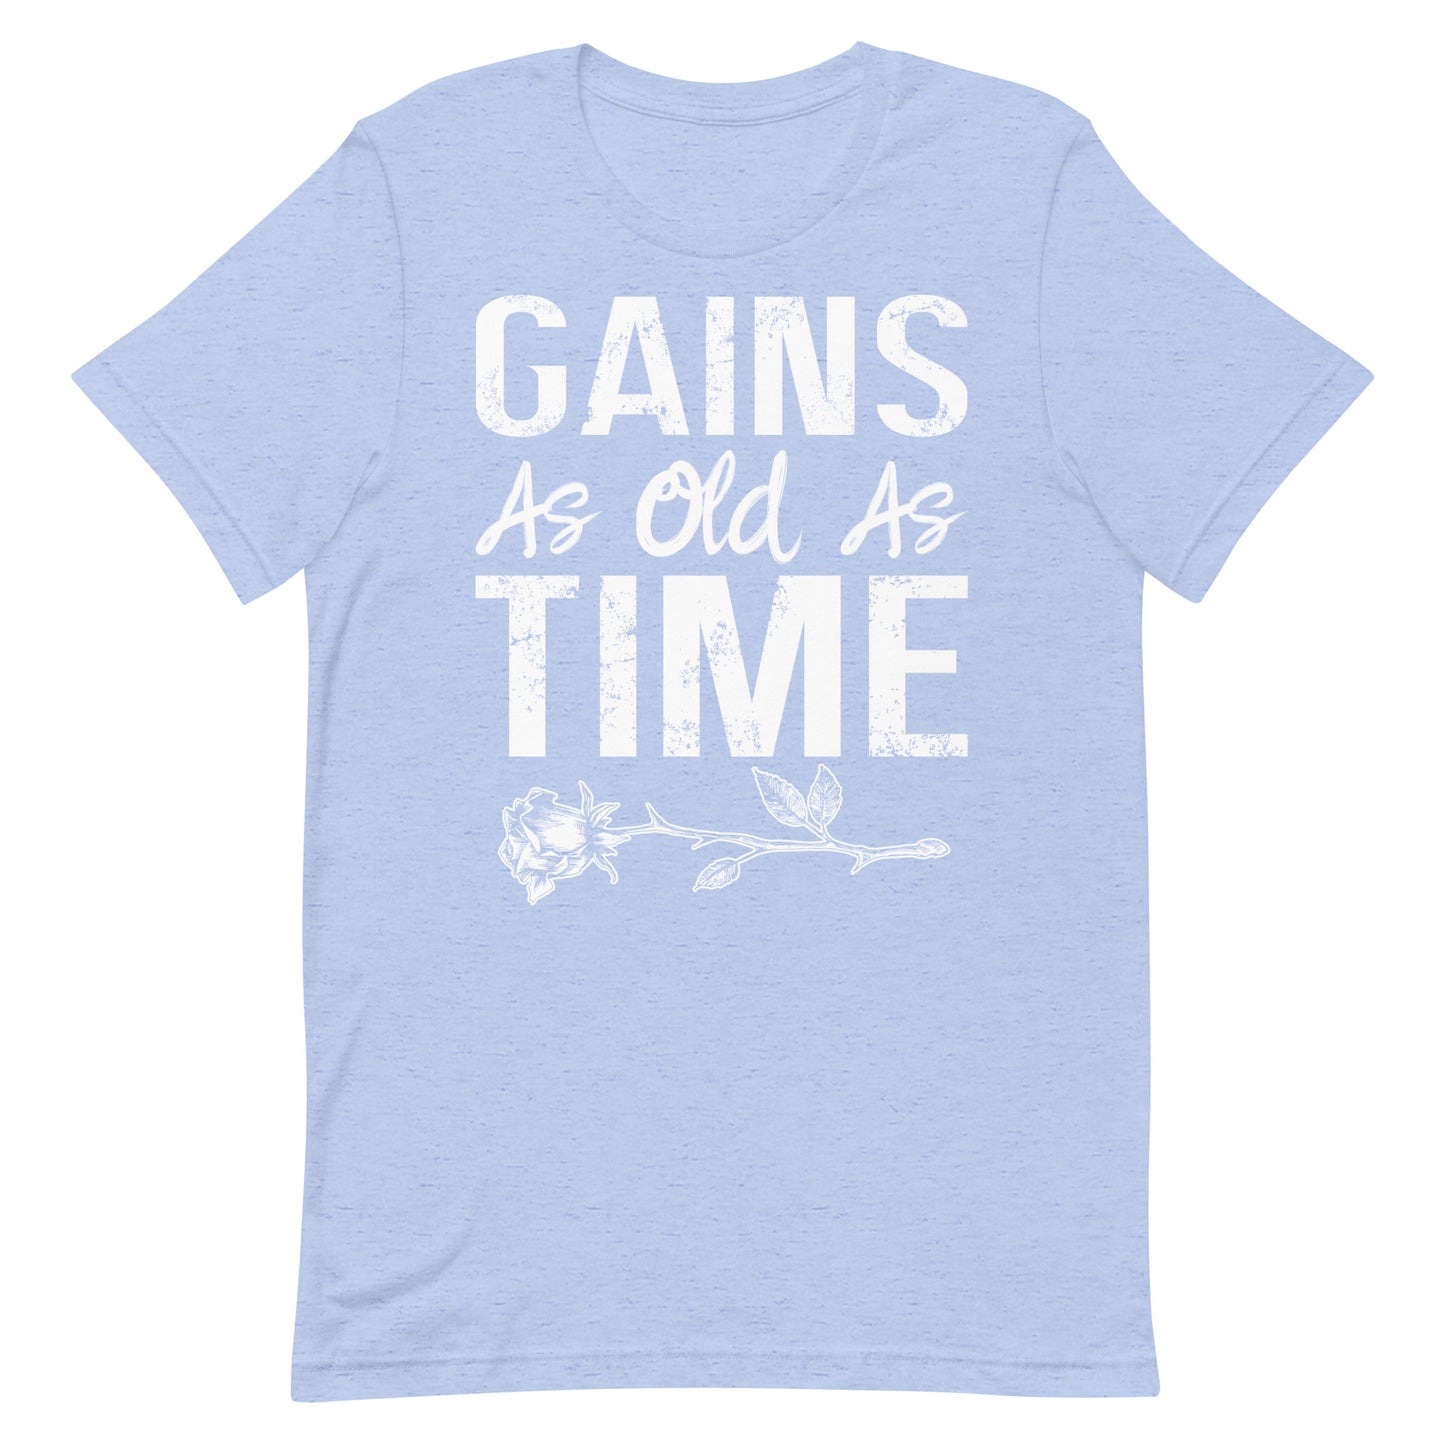 Gains As Old As Time T-Shirt